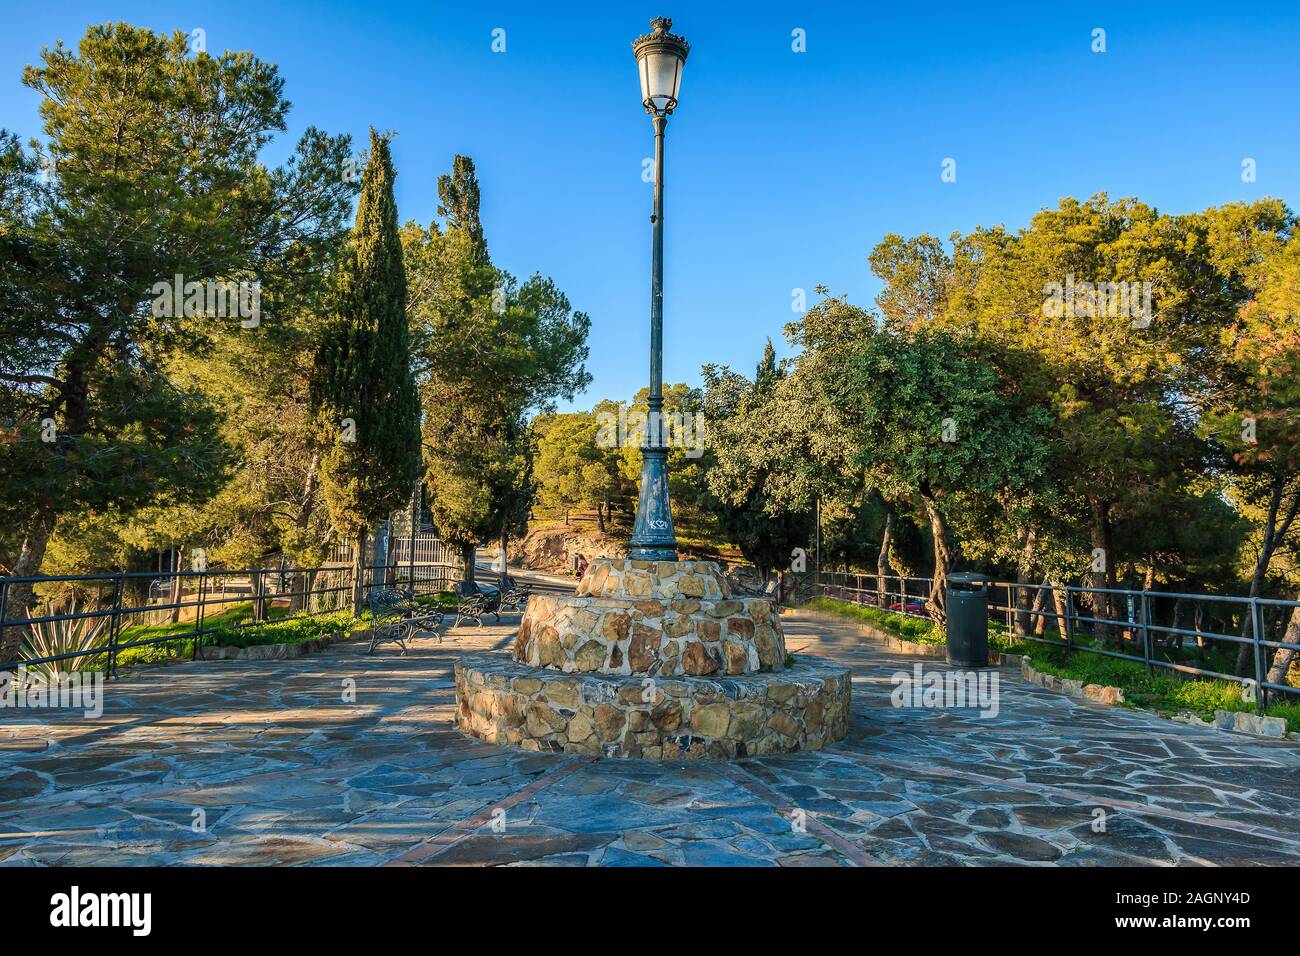 Gibralfaro in Malaga. Lookout point with paved footpath and central street lamp on sunny day surrounded by conifers and cypresses with blue sky Stock Photo